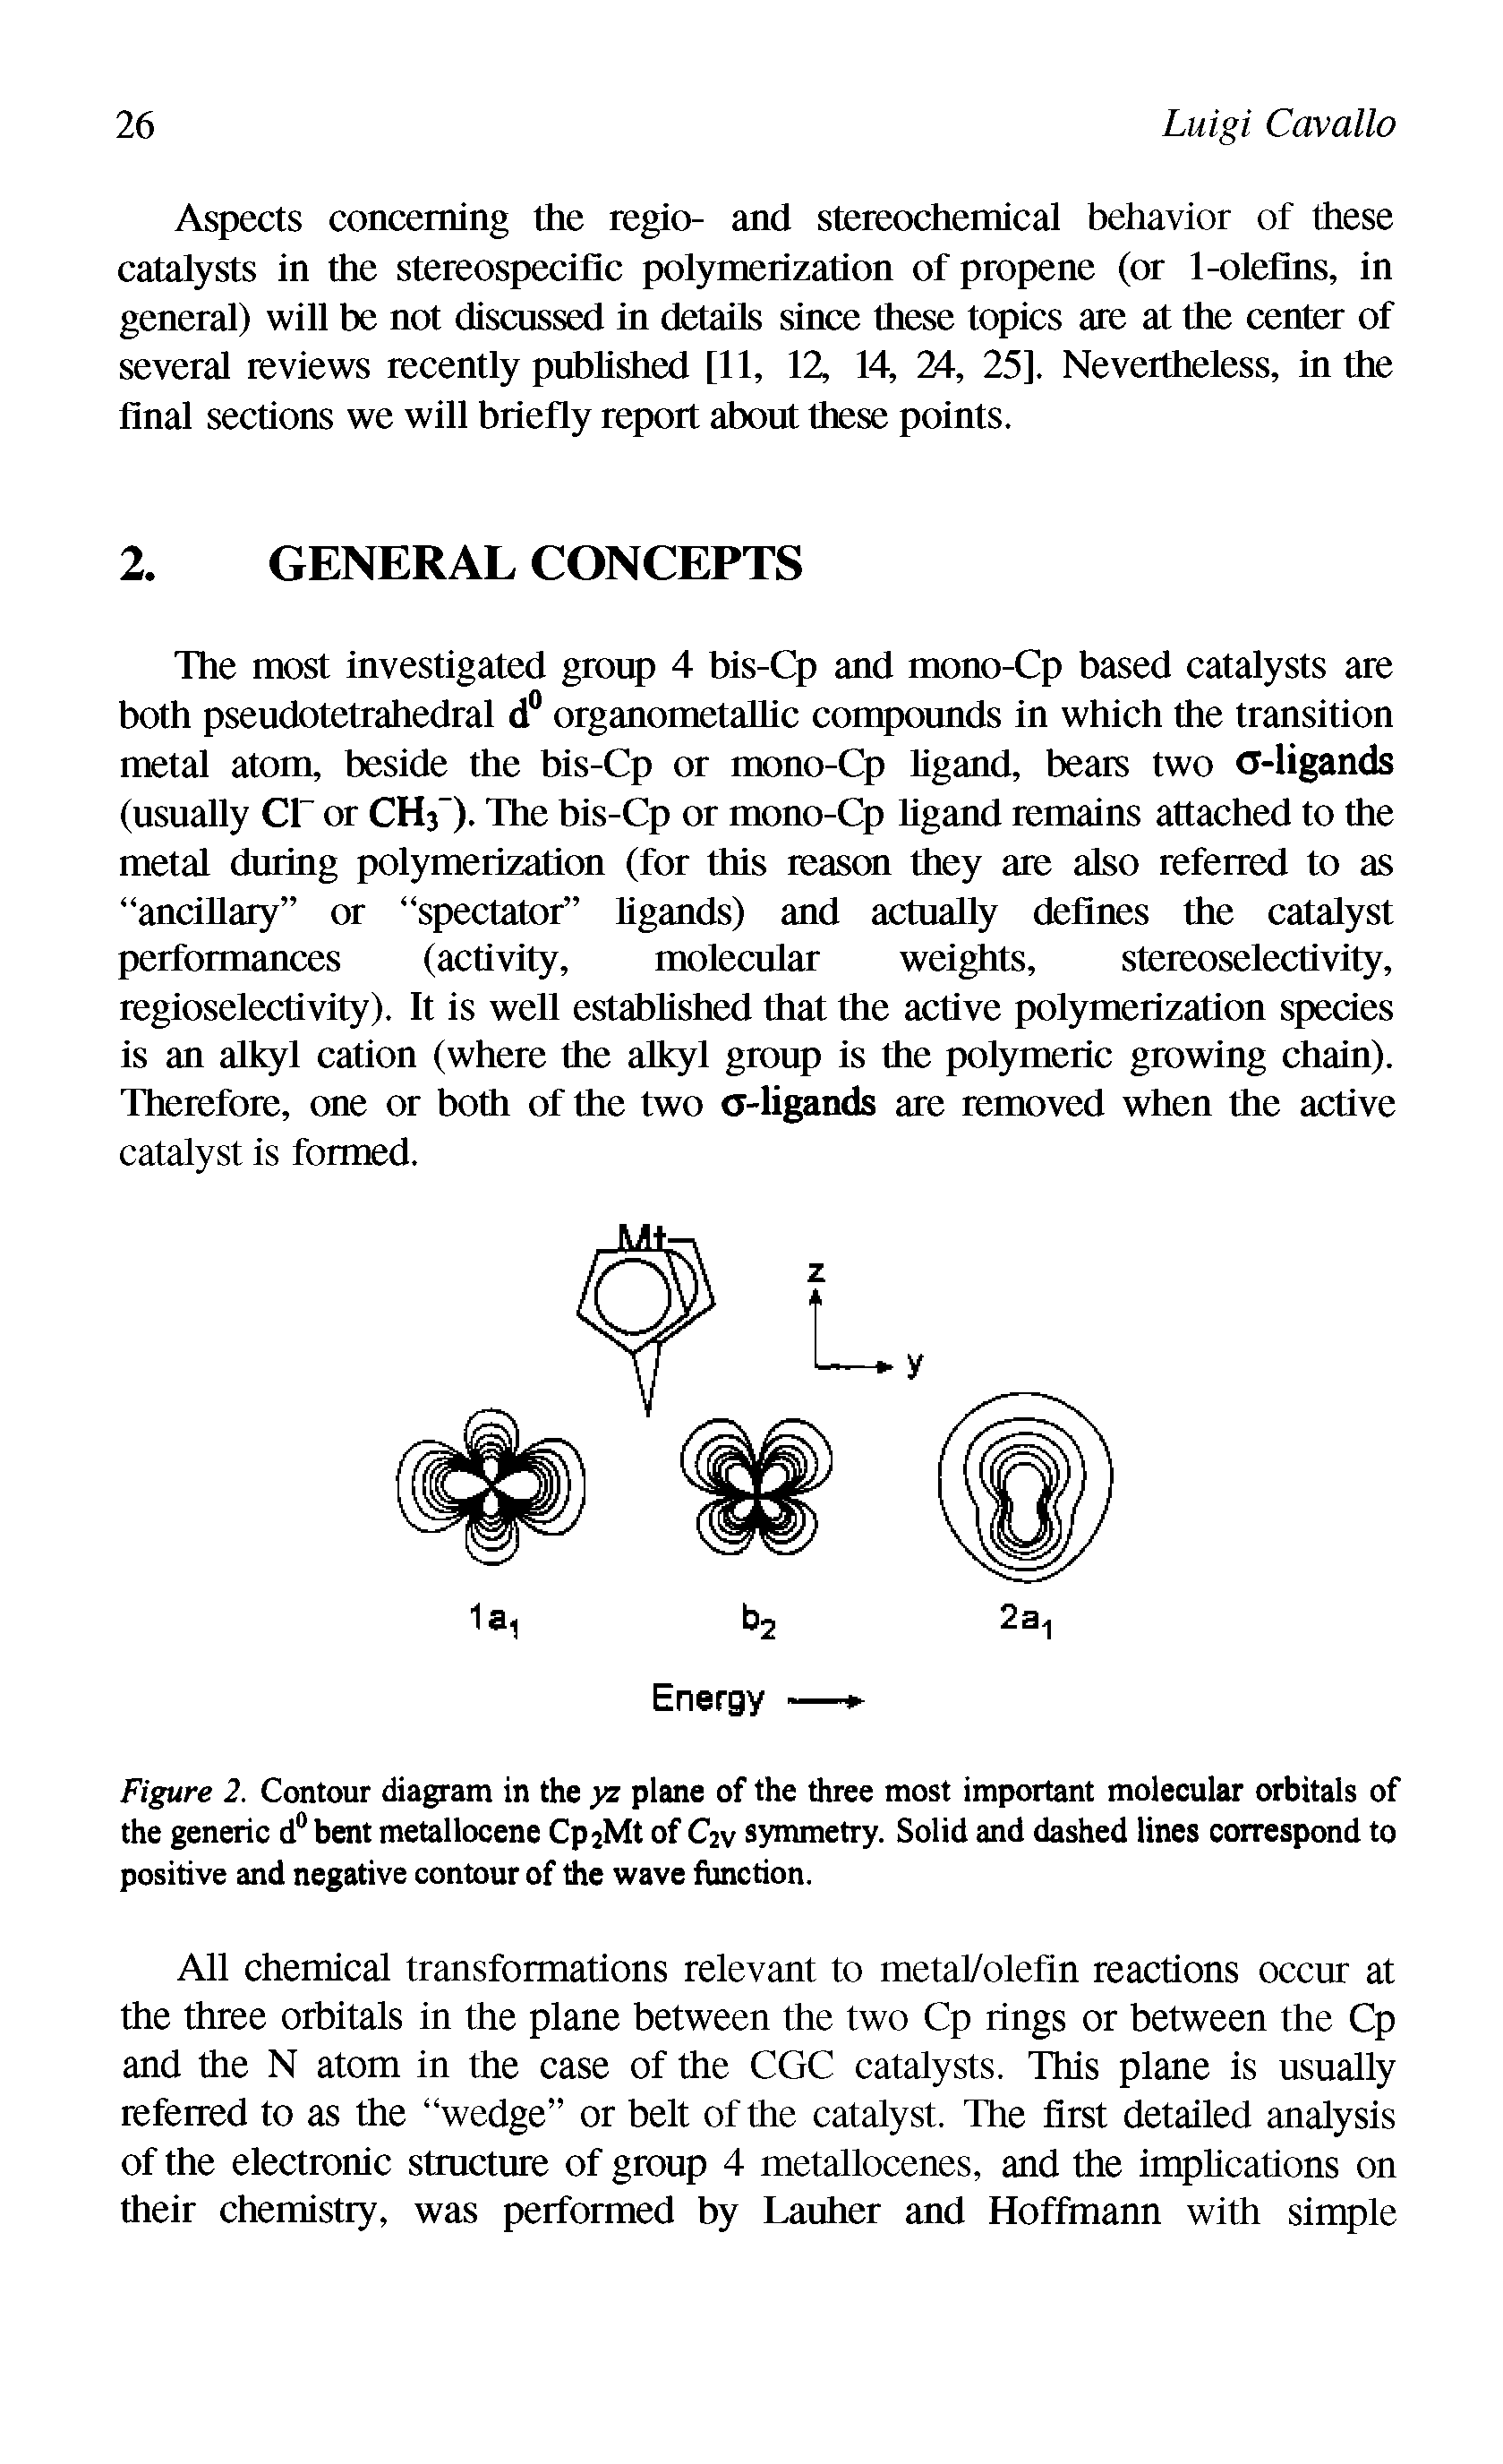 Figure 2. Contour diagram in the yz plane of the three most important molecular orbitals of the generic d° bent metallocene Cp Mt of Gi symmetry. Solid and dashed lines correspond to positive and negative contour of the wave function.